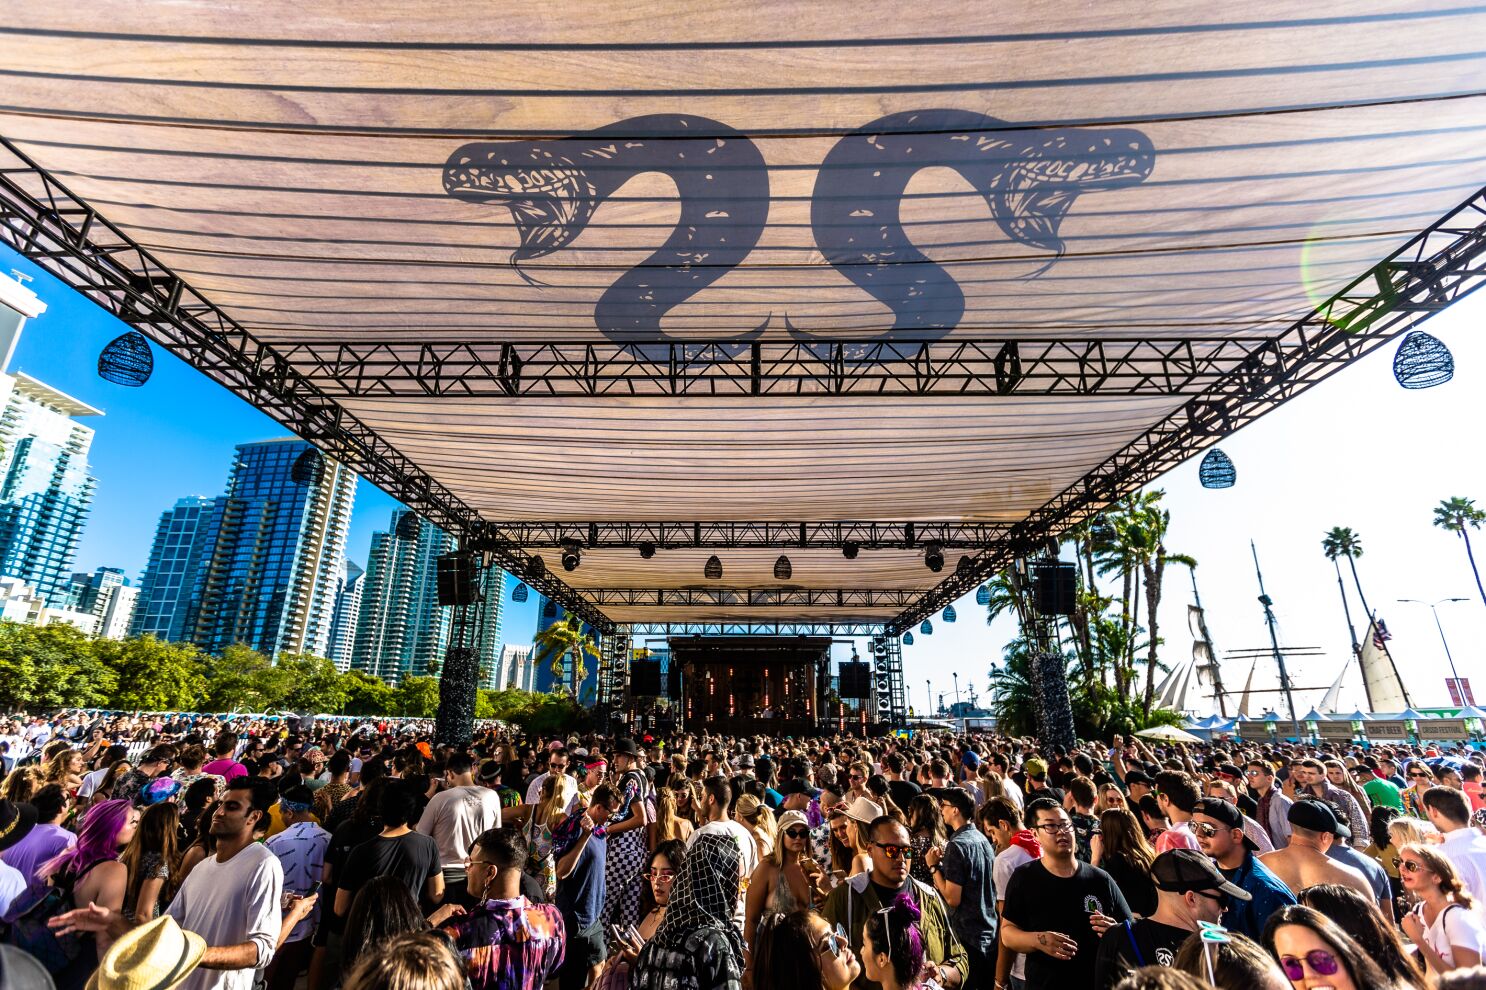  XL house and techno music festival set for August Waterfront Park  debut as prelude to next CRSSD Fest - The San Diego Union-Tribune